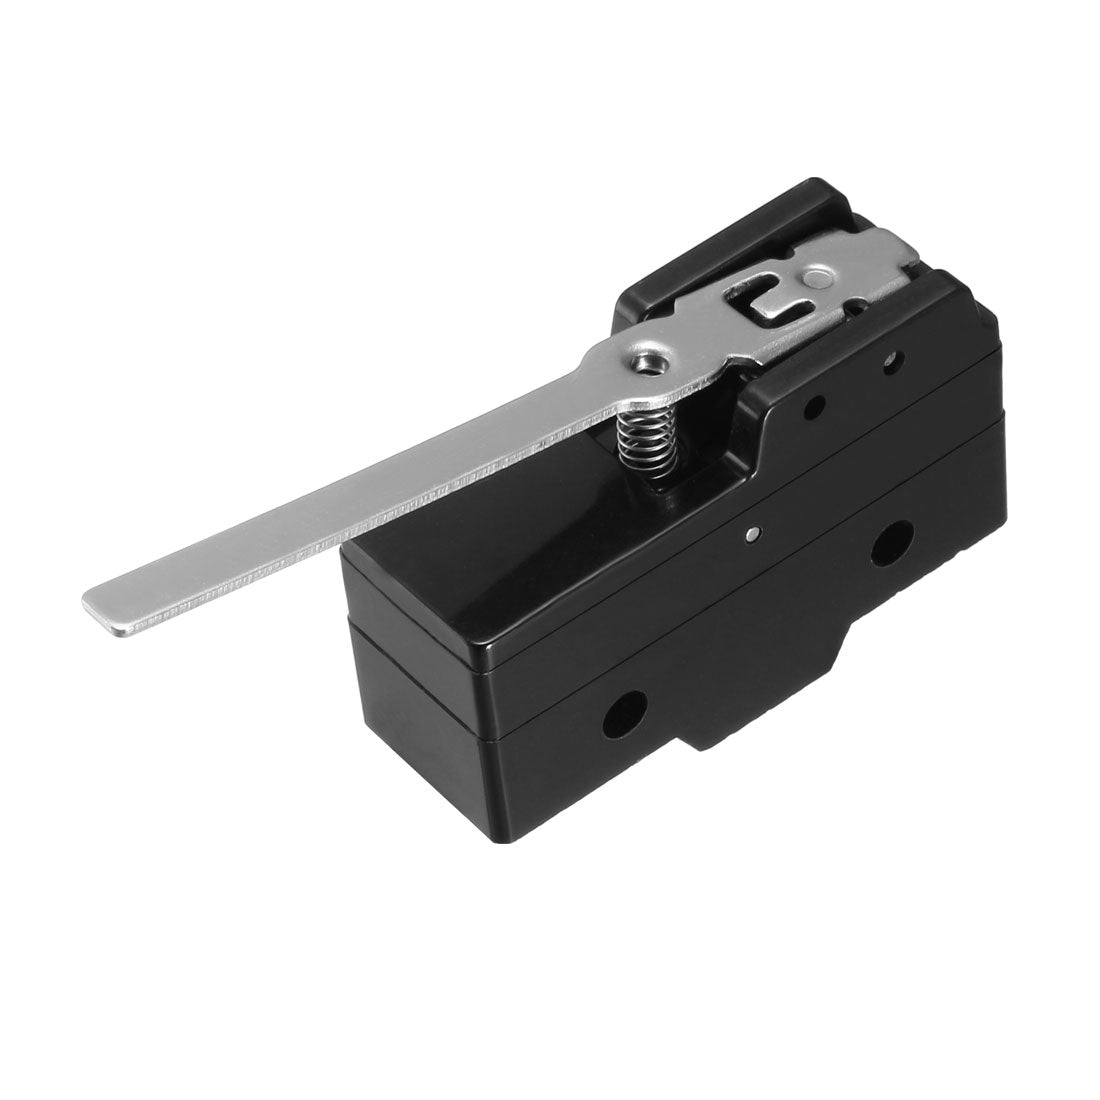 uxcell Uxcell XZ-15GW-B Long Hinge Lever Type Micro Limit Switch